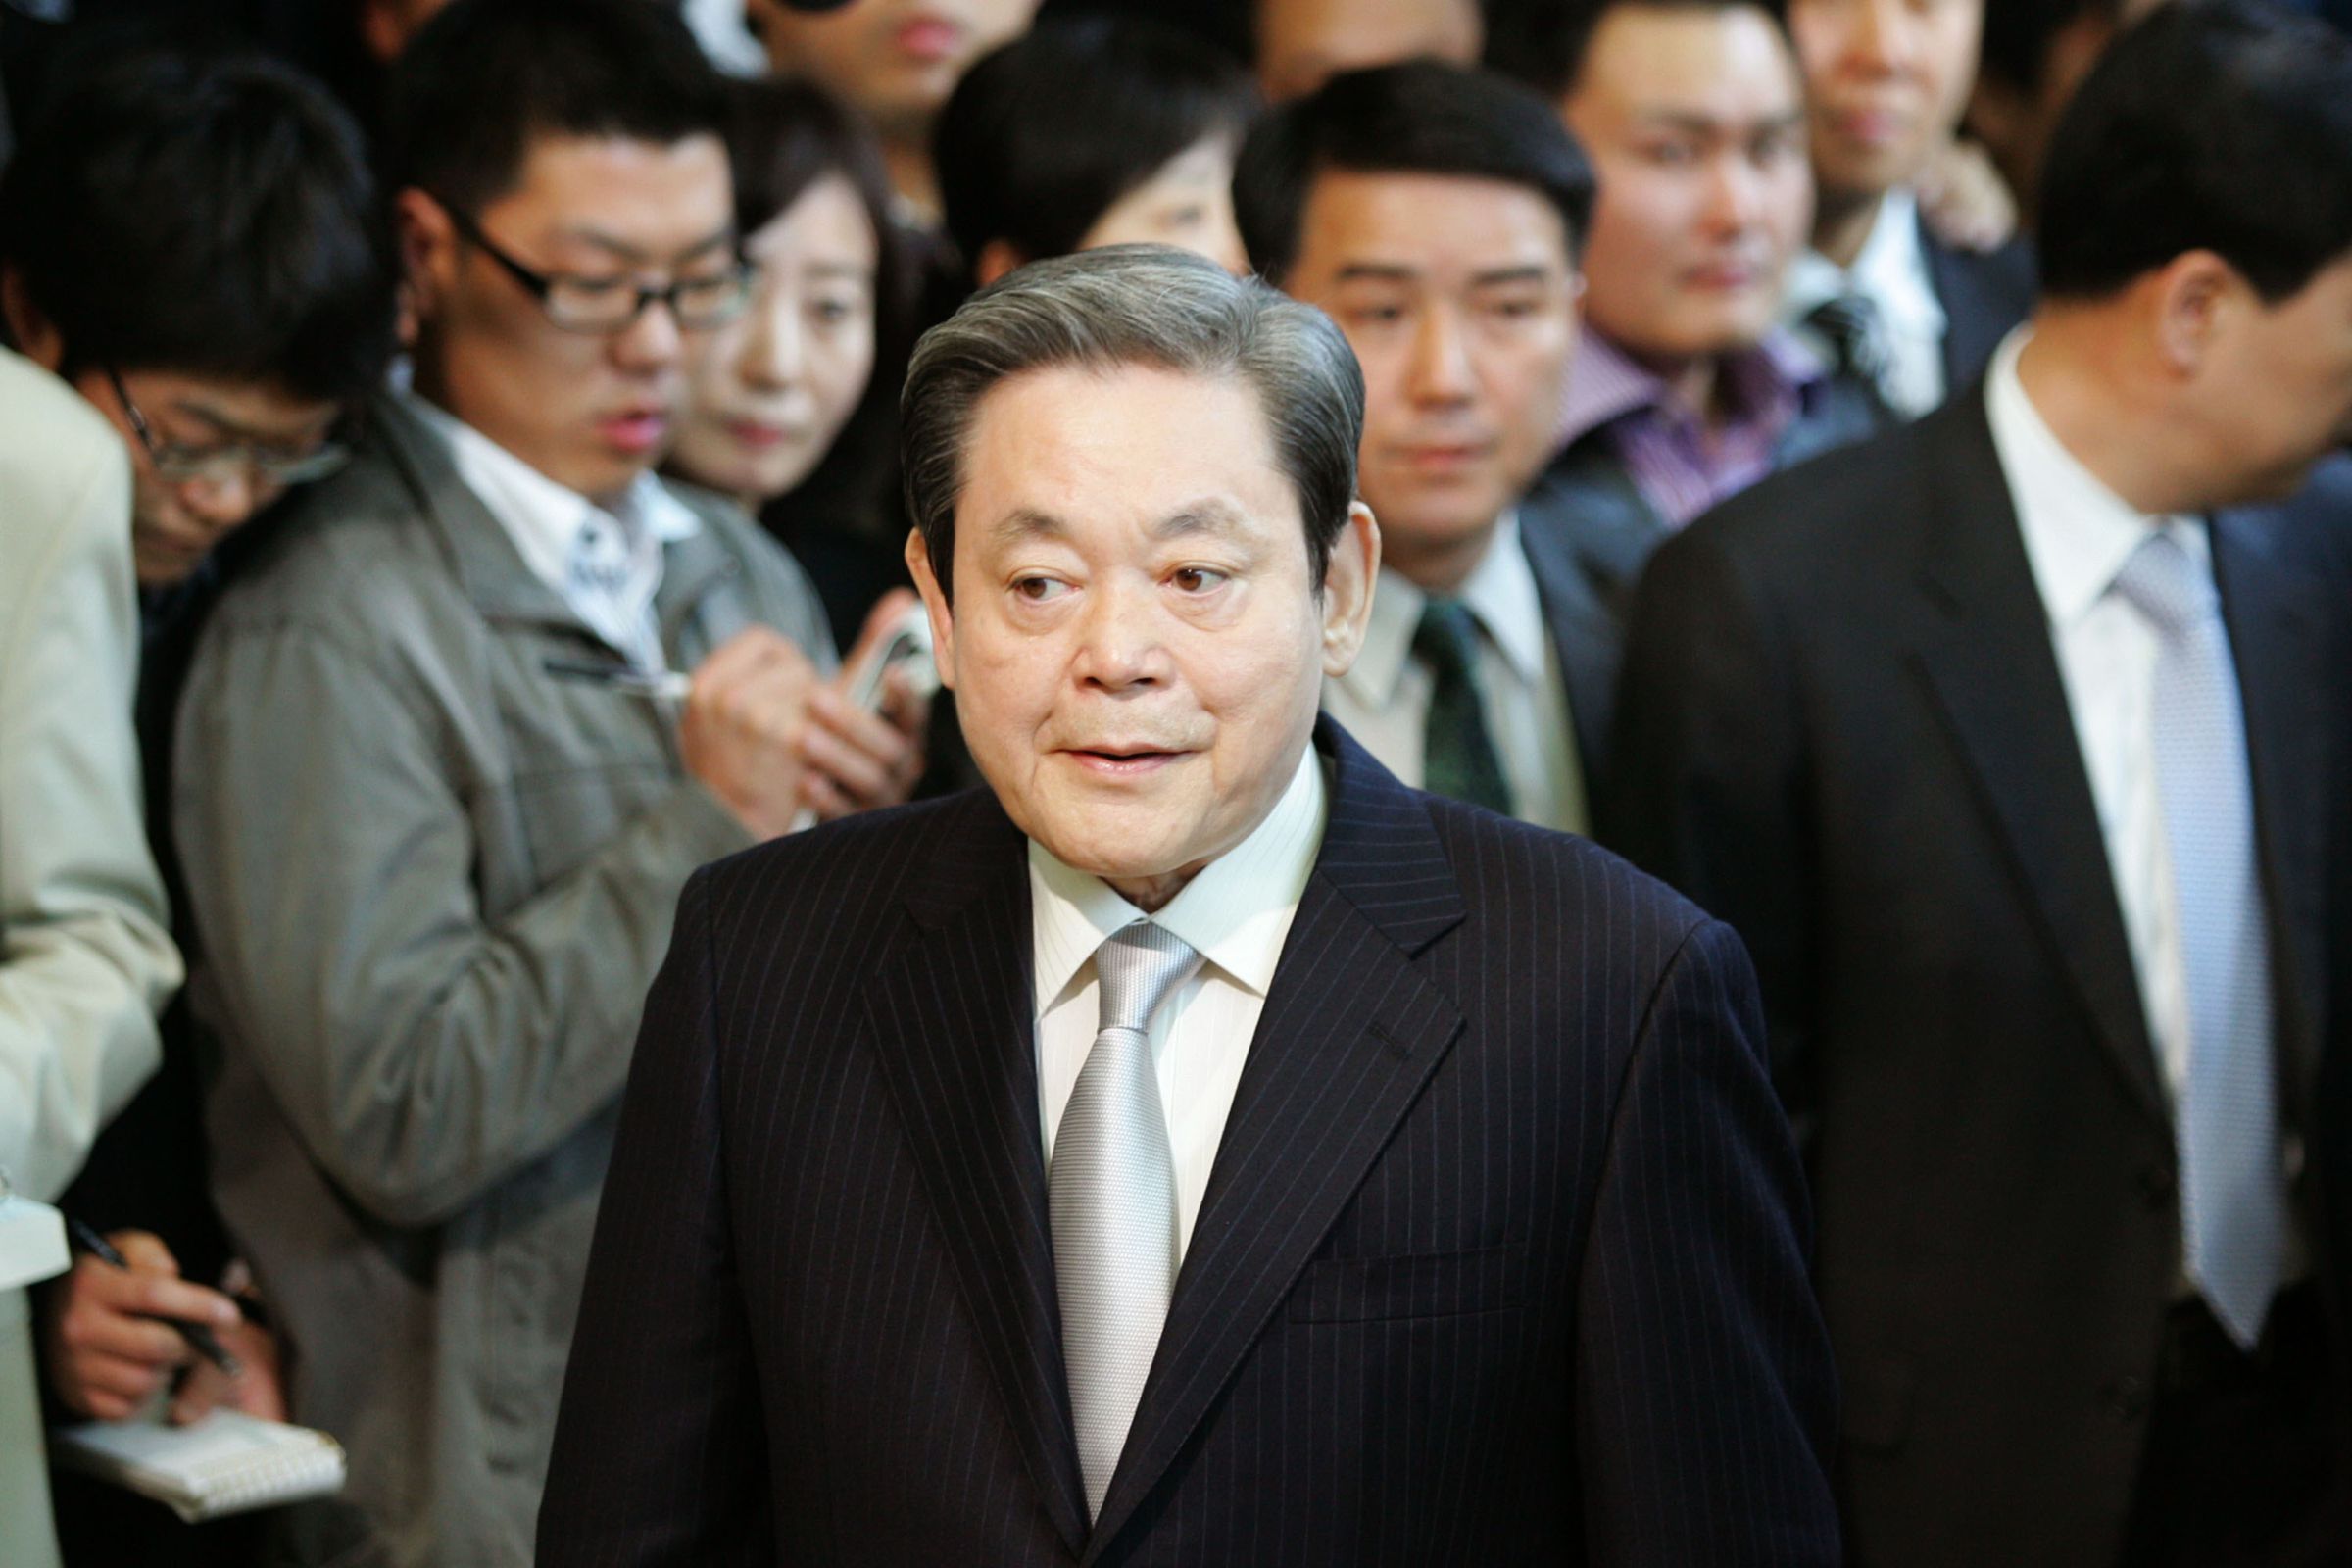 Samsung Group chairman Lee Kun-Hee Denies Corruption Charges